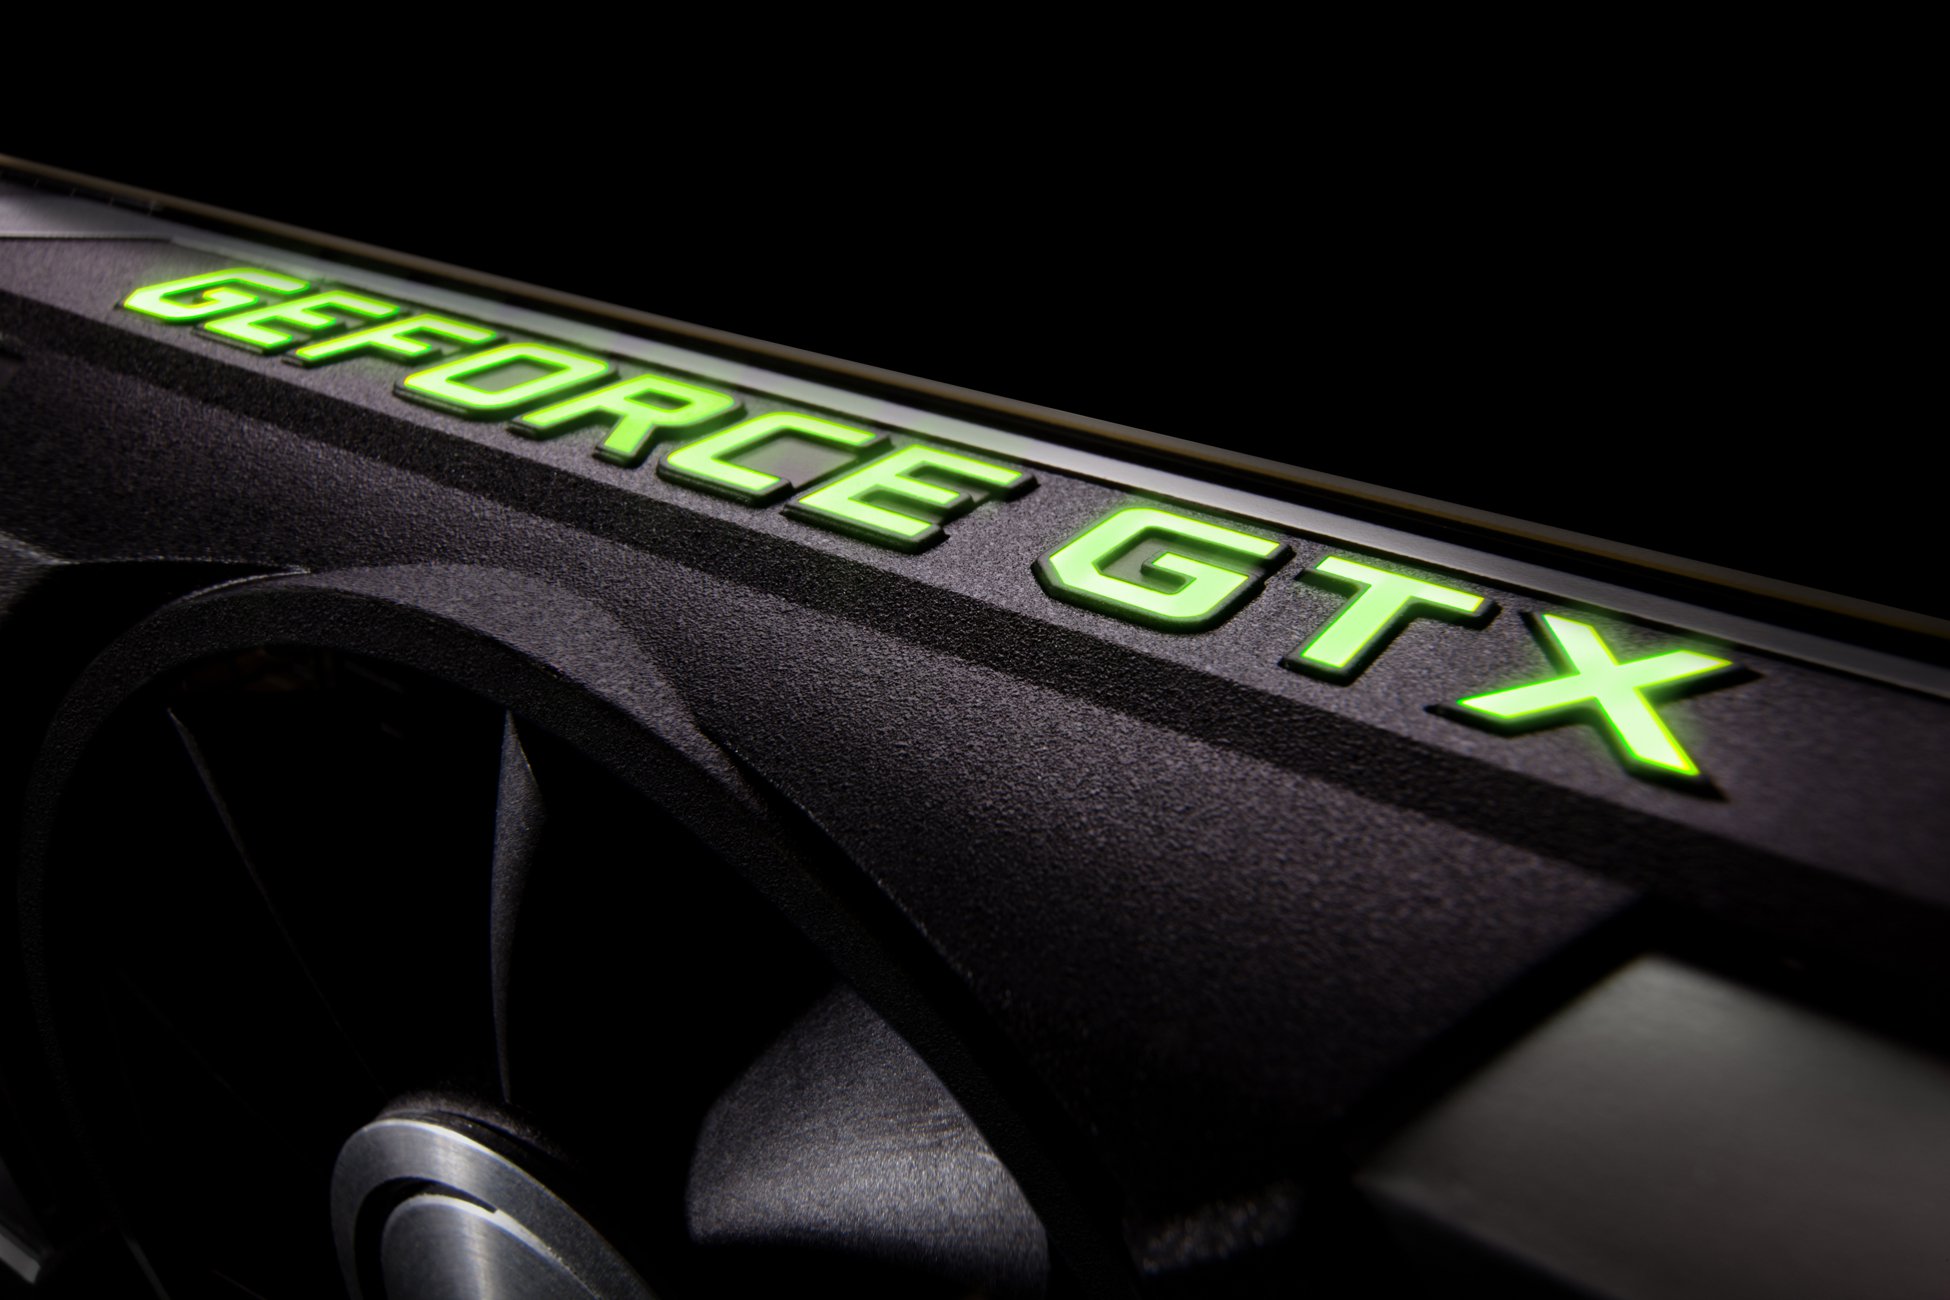 Nvidia S Geforce Gtx Ti Was Benchmarked Over The Weekend At